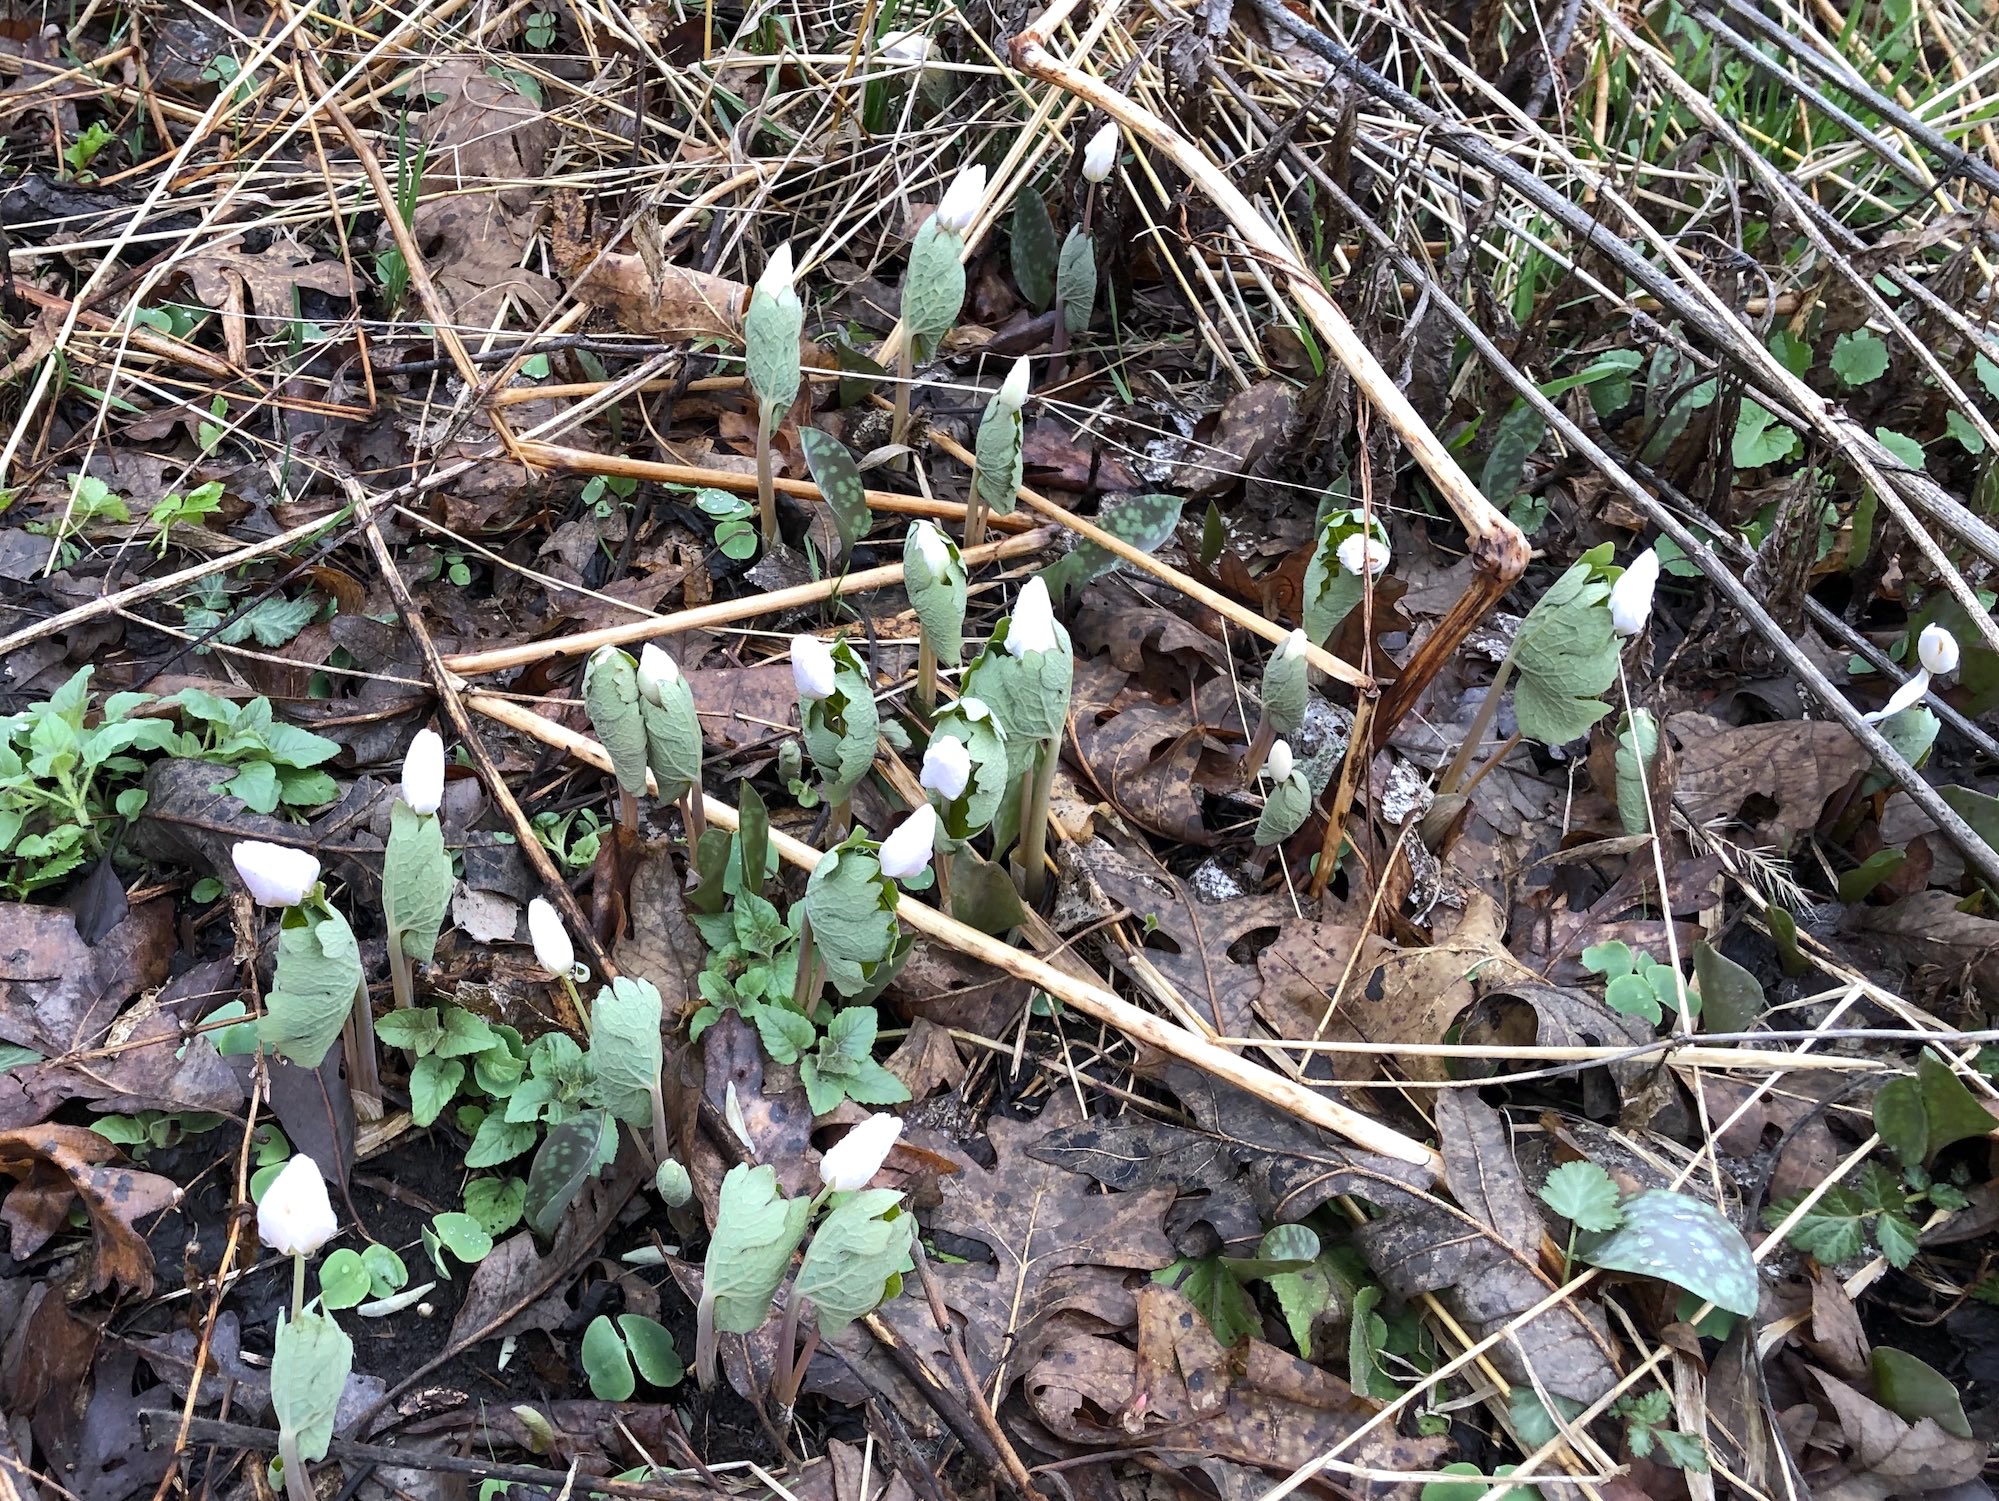 Bloodroot near Council Ring on April 12, 2019.